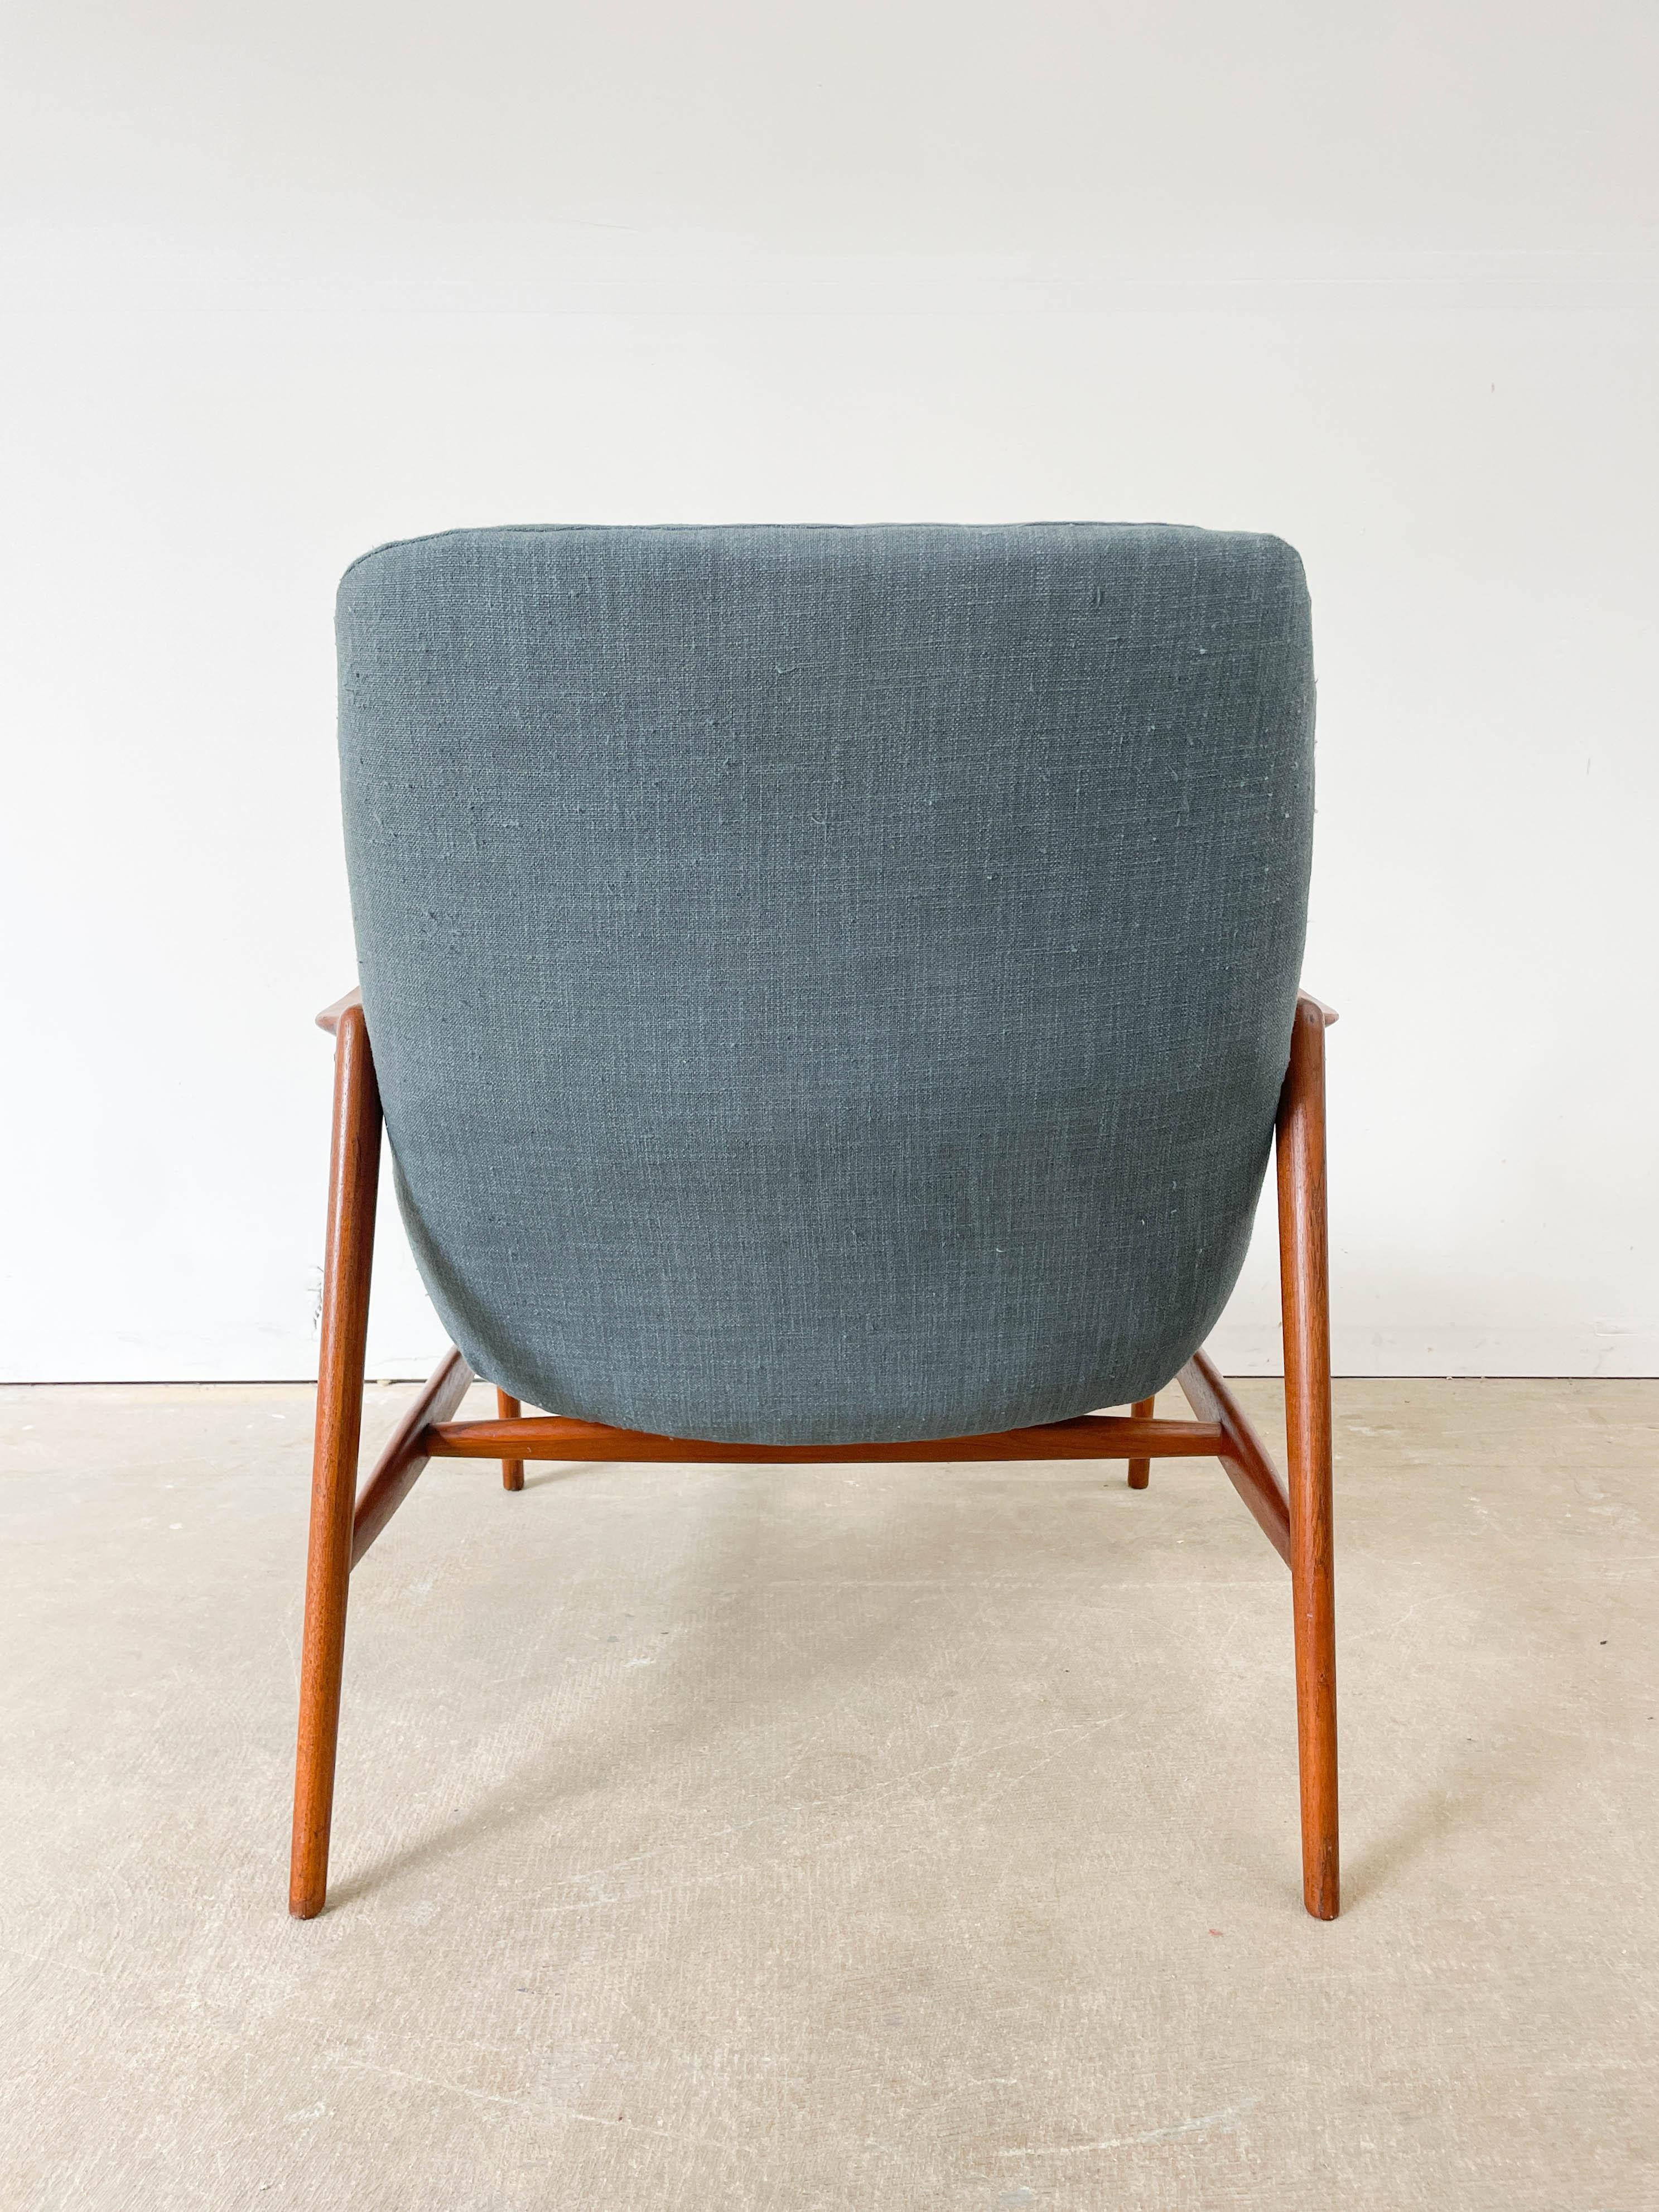 Teak ￼lounge chair designed by Rolf Rastad and Adolf Relling. Made in the 1950s this Norwegian chair features a sculpted frame that cradles and upholstered seat module. A very good looking chair which is equally comfortable.
